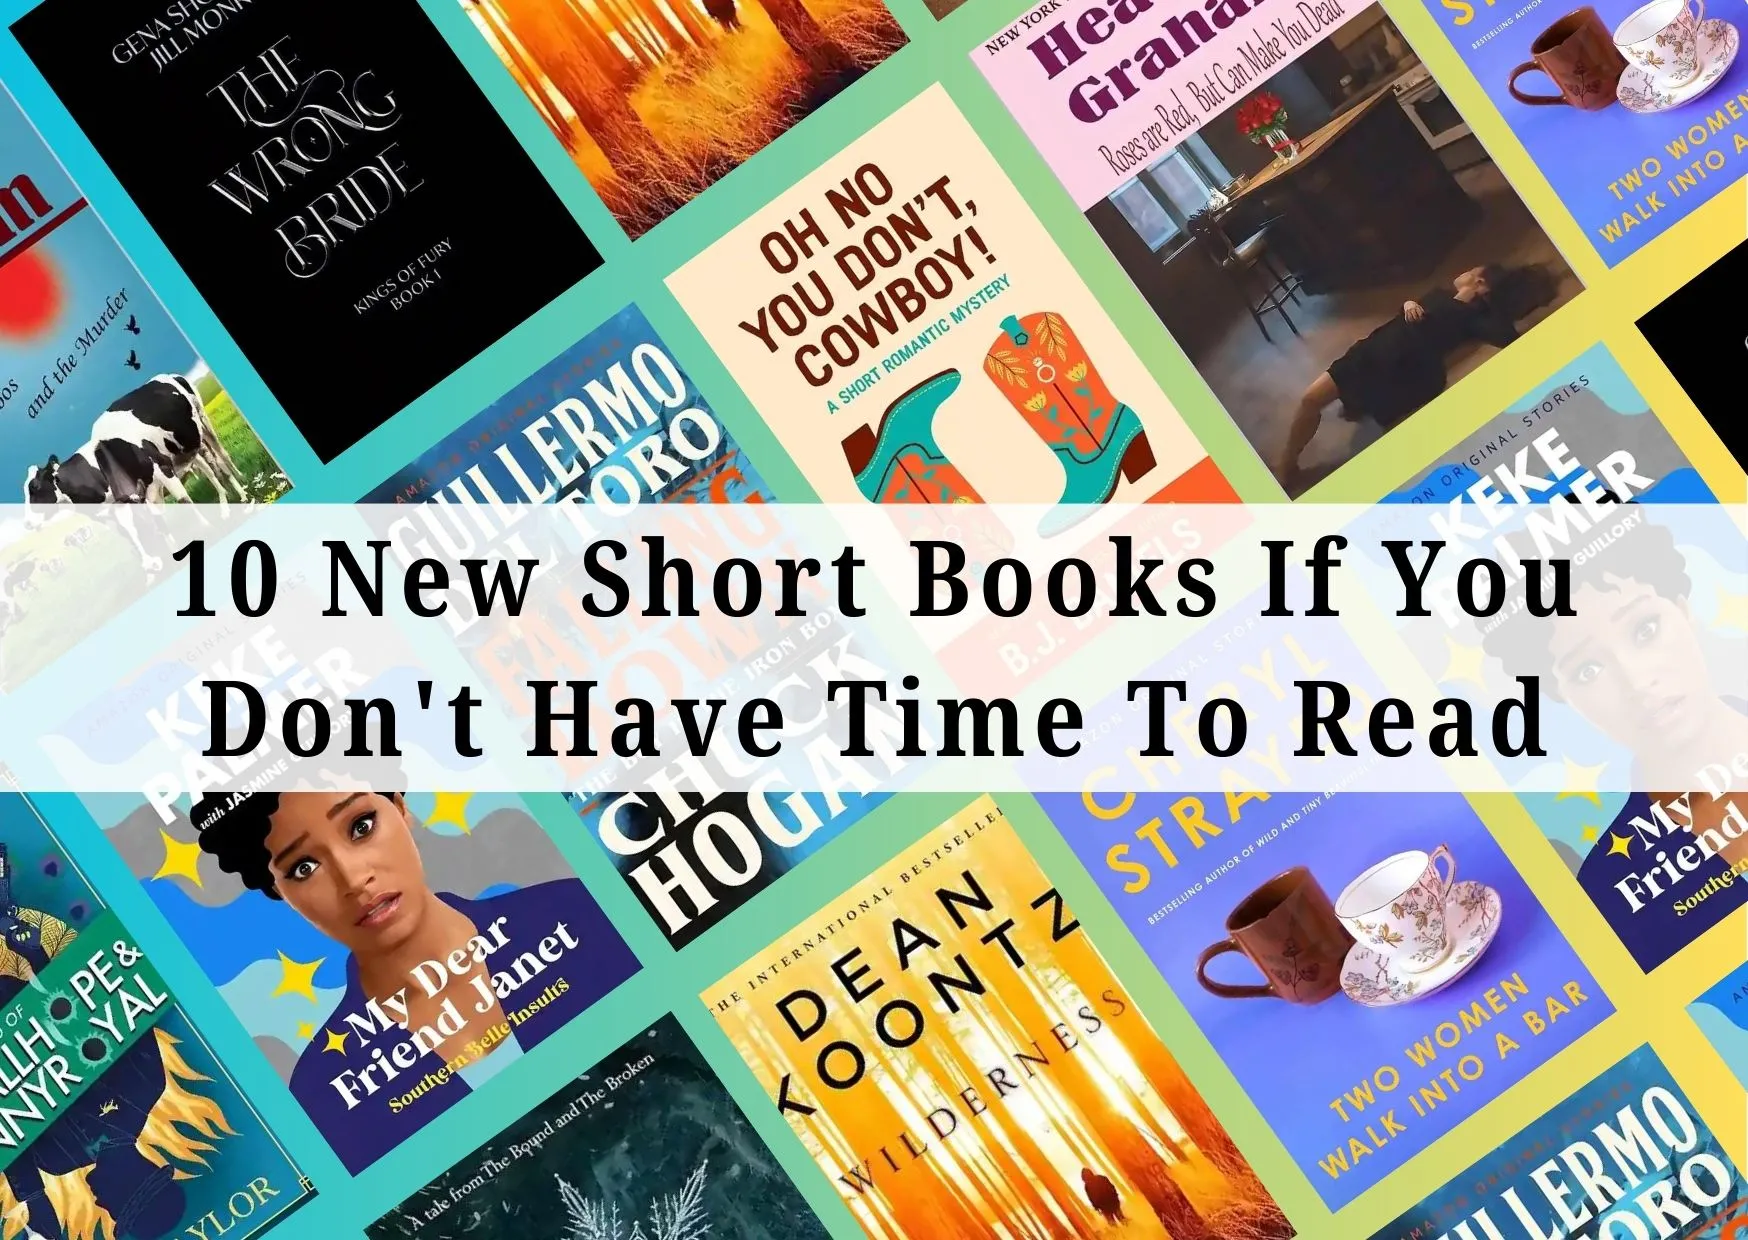 new-short-books-if-you-dont-have-time-to-read